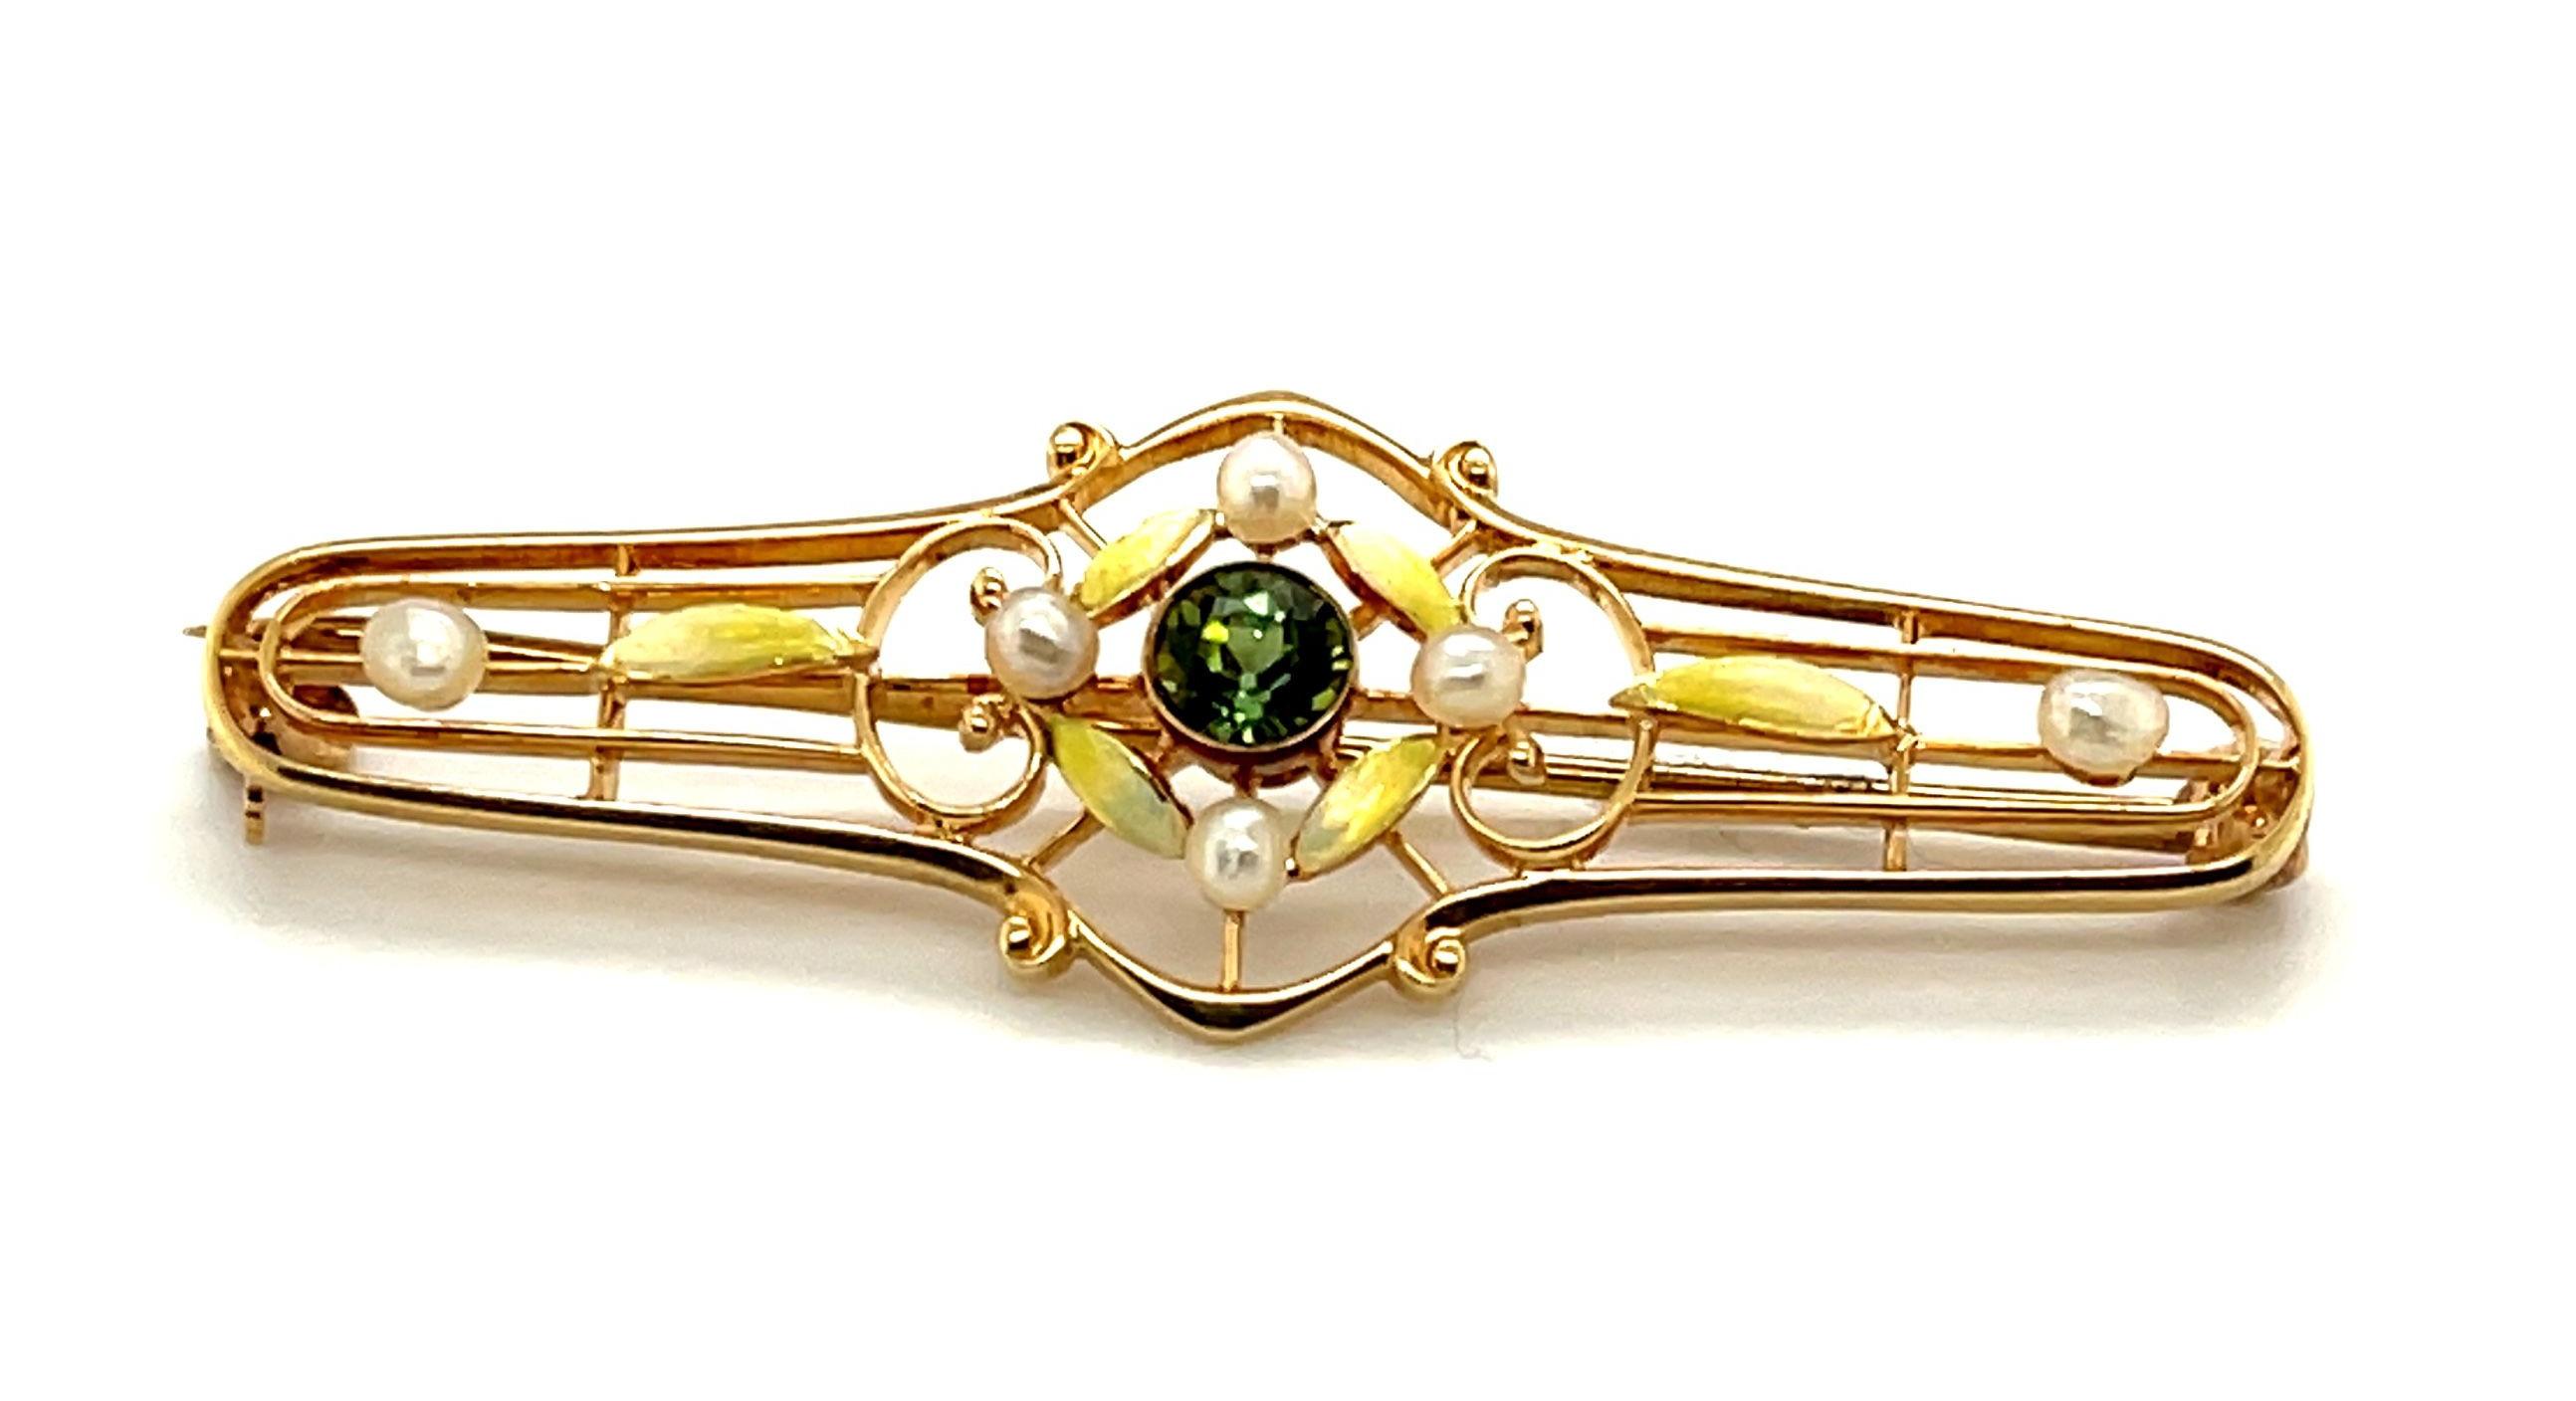 This beautiful 14k yellow gold Art Nouveau inspired pin features a very rare demantoid garnet, the rarest of all garnets. Displaying its characteristic green hue and brilliant fire, the 4.4mm demantoid garnet is framed by six 2mm white pearls and